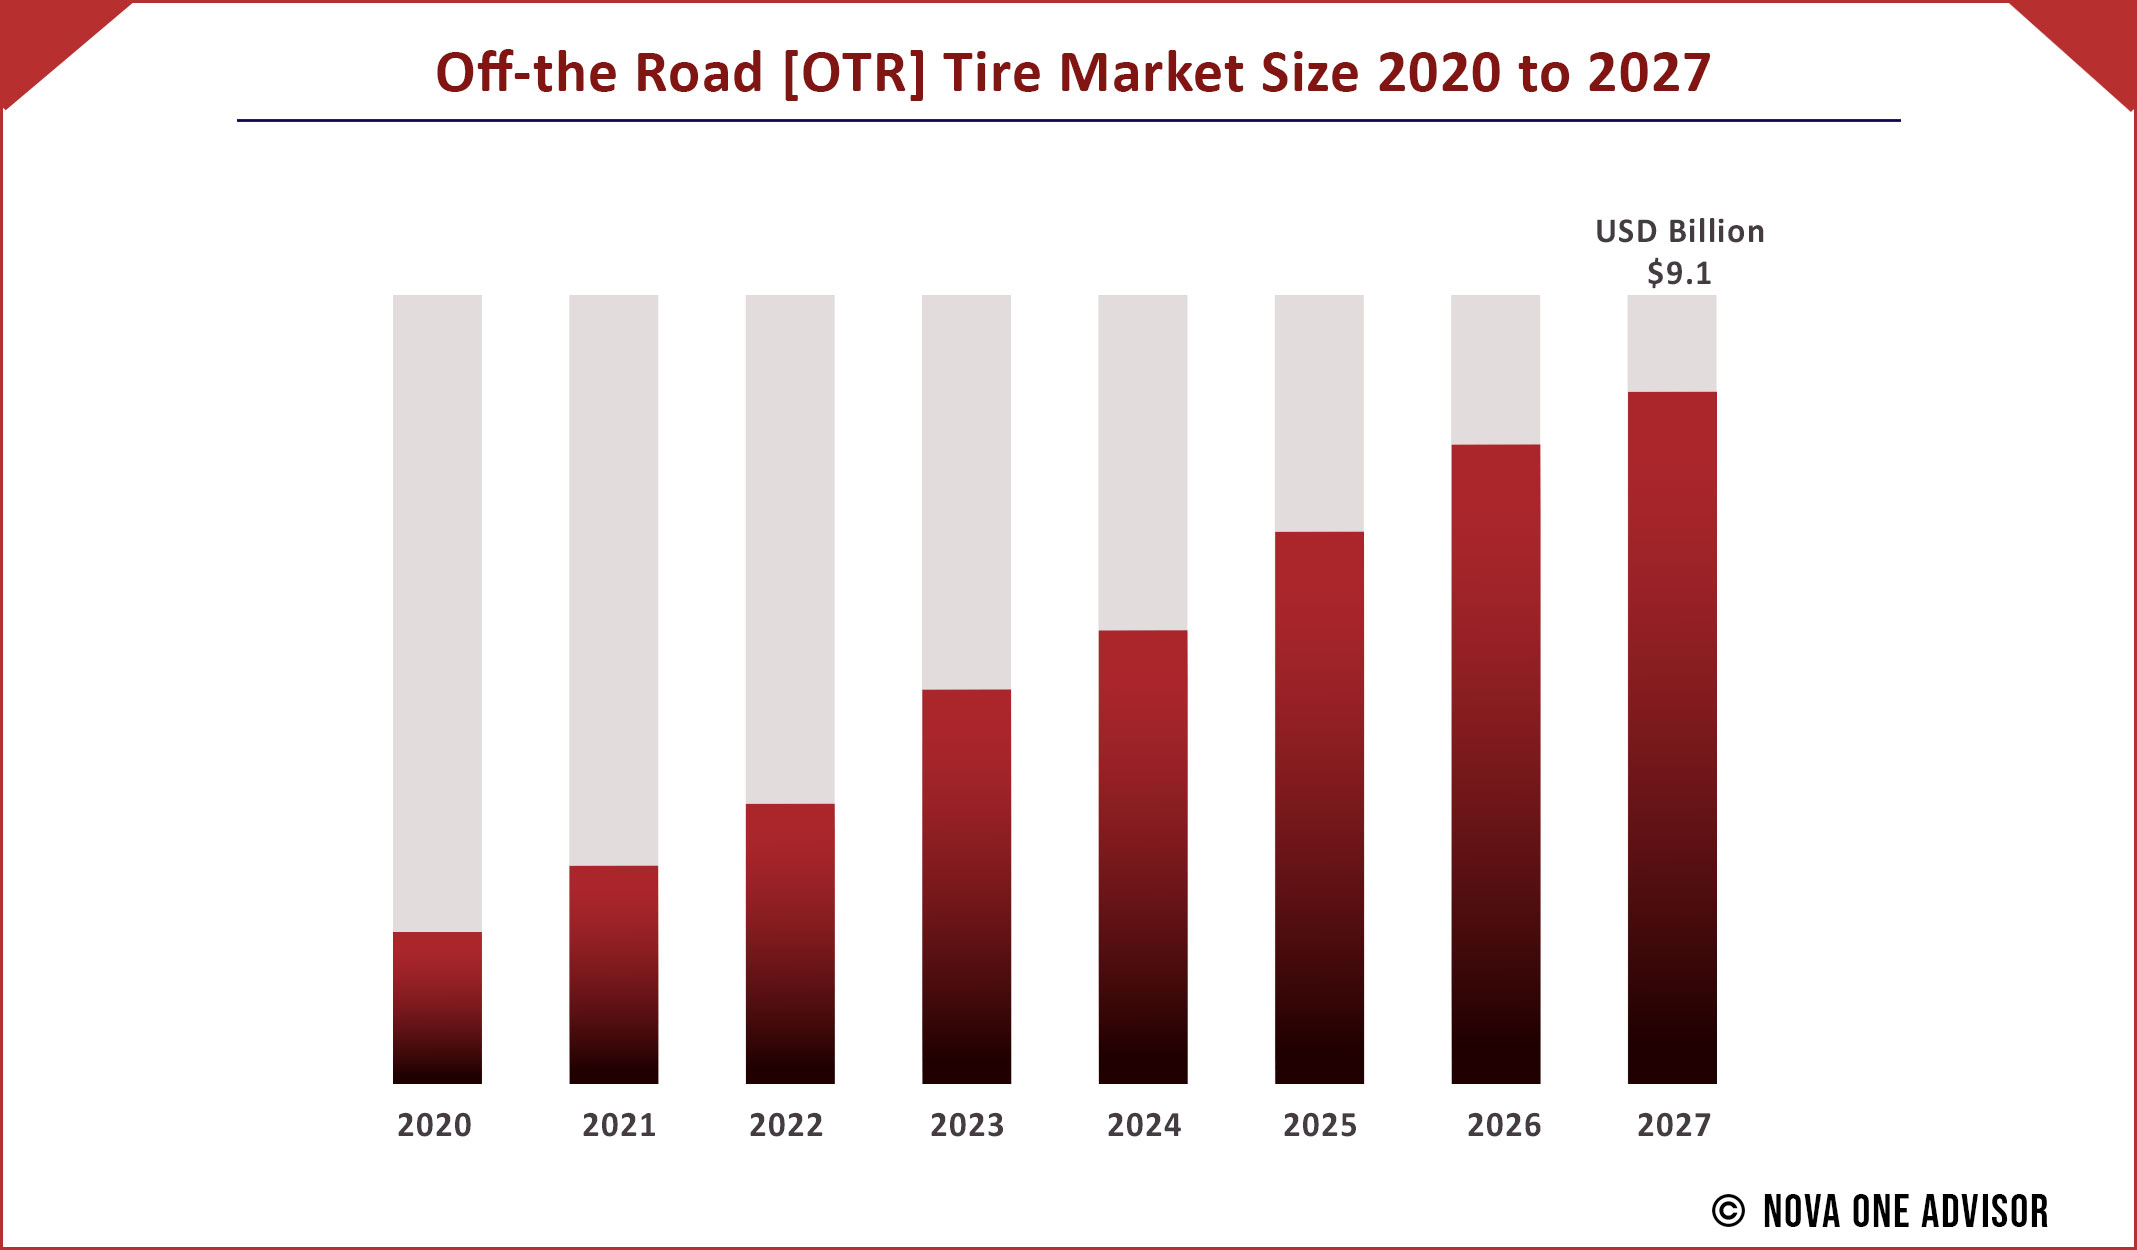 Off-the Road [OTR] Tire Market Size 2020 to 2027